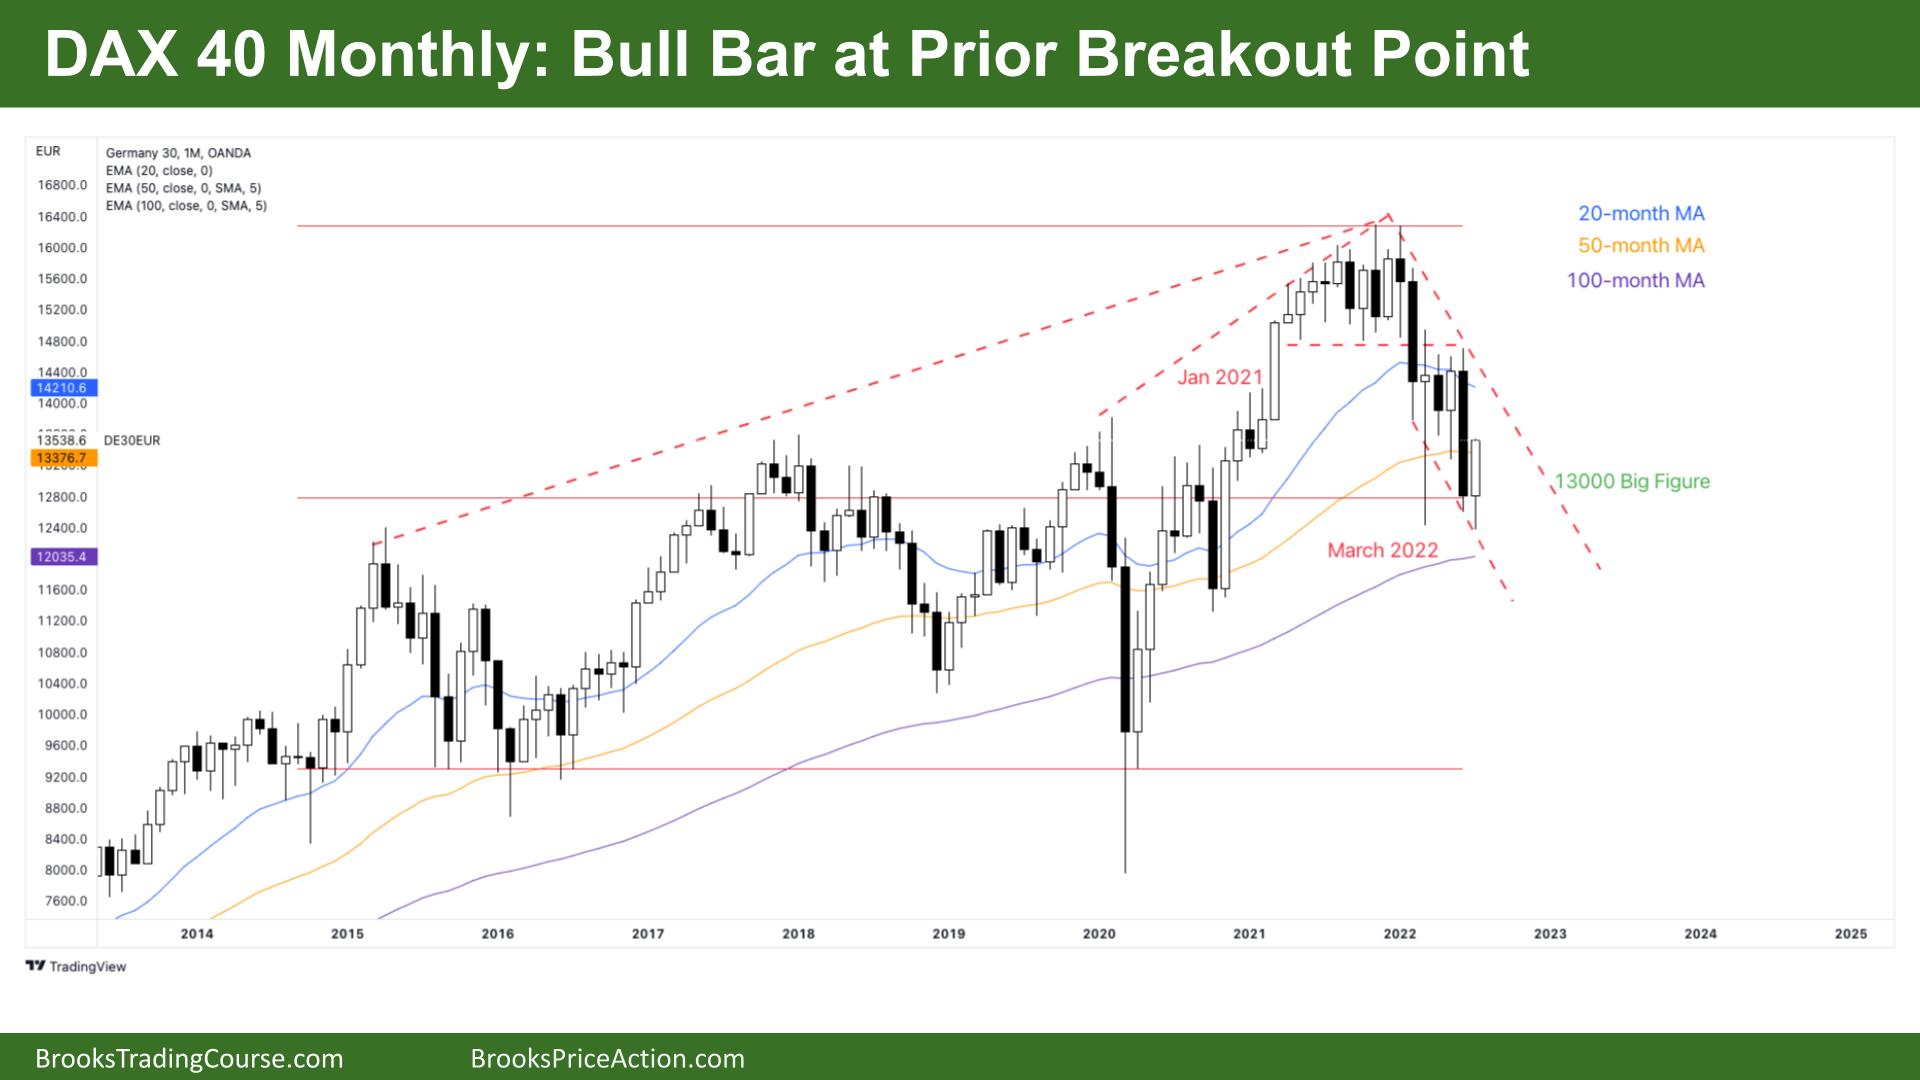 DAX 40 Monthly Bull Bar at Prior Breakout Point